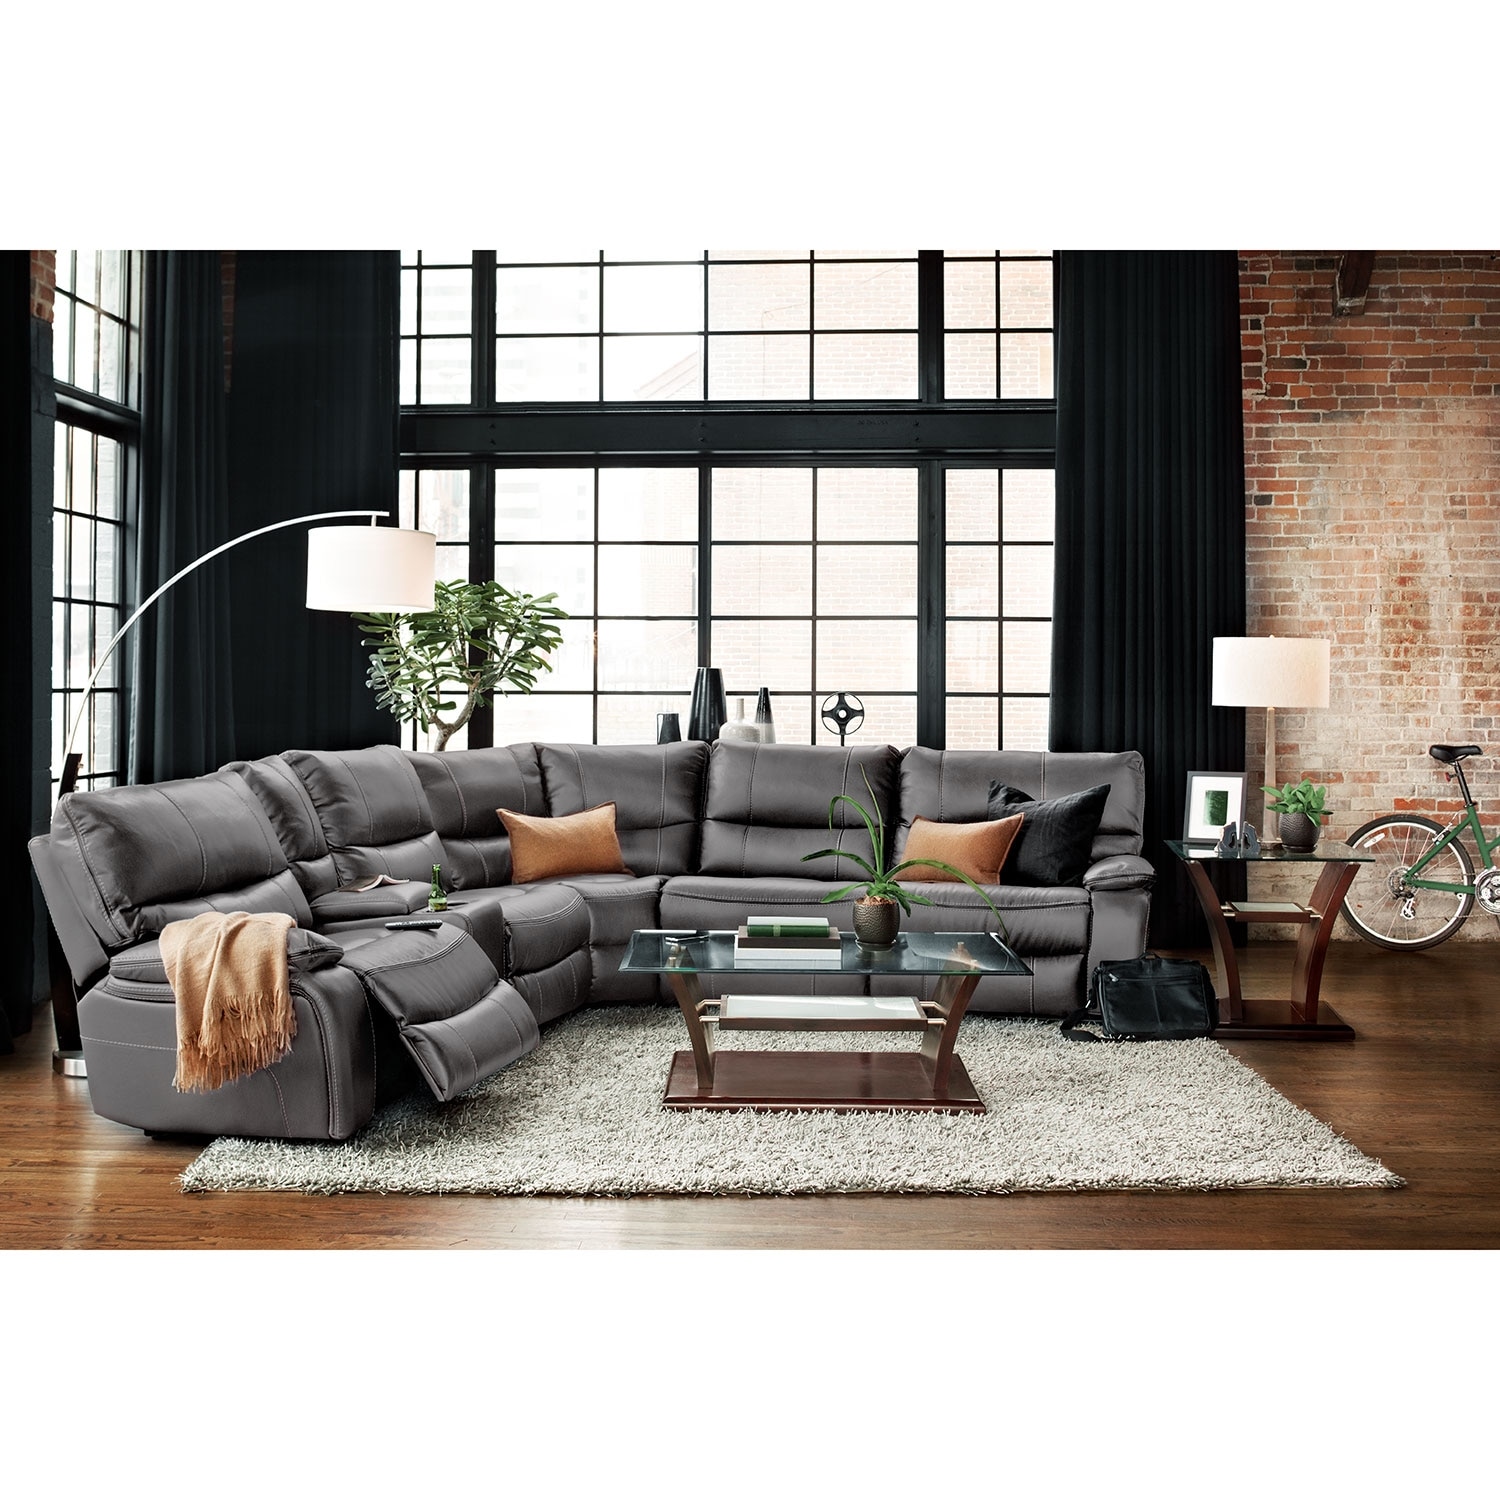 Orlando 6 Piece Power Reclining Sectional With 1 Stationary Chair